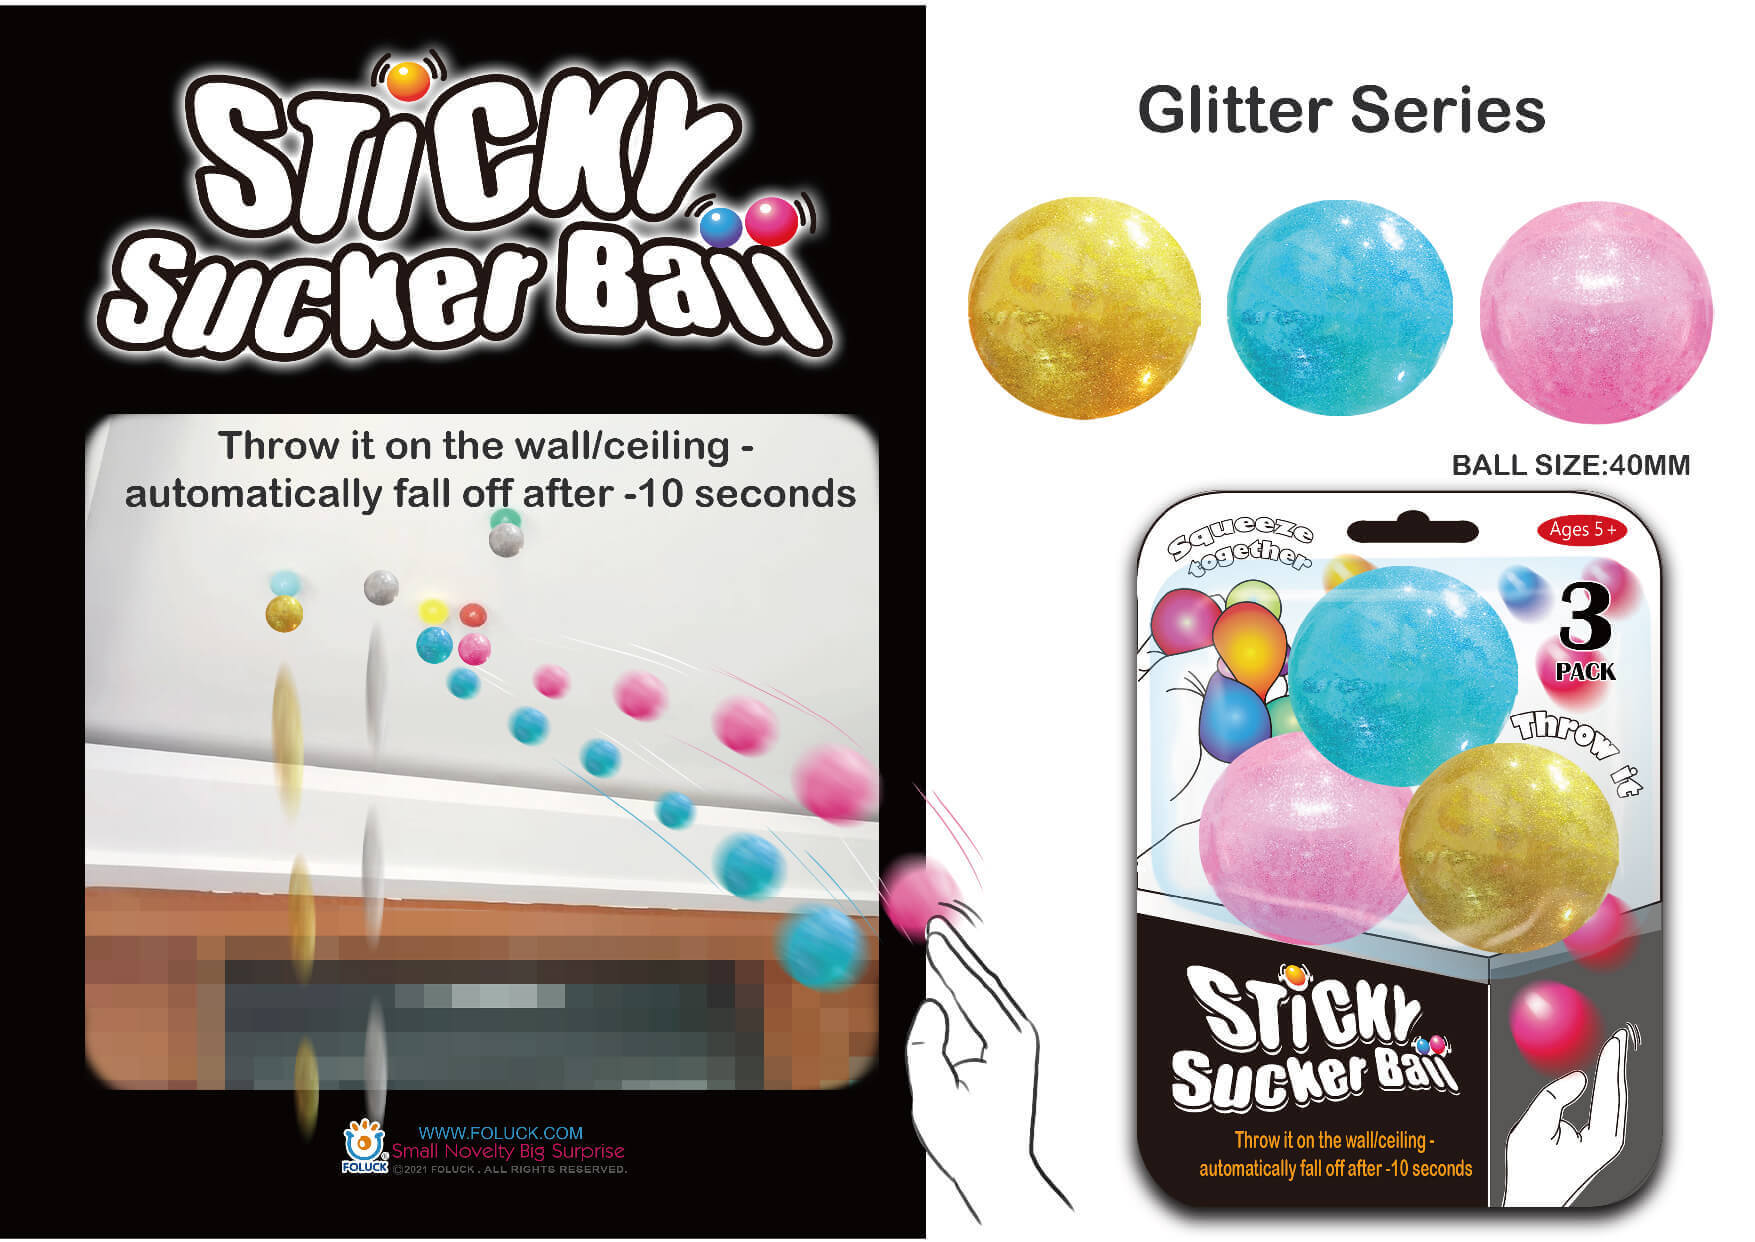 Sticky Balls are so IN right now!